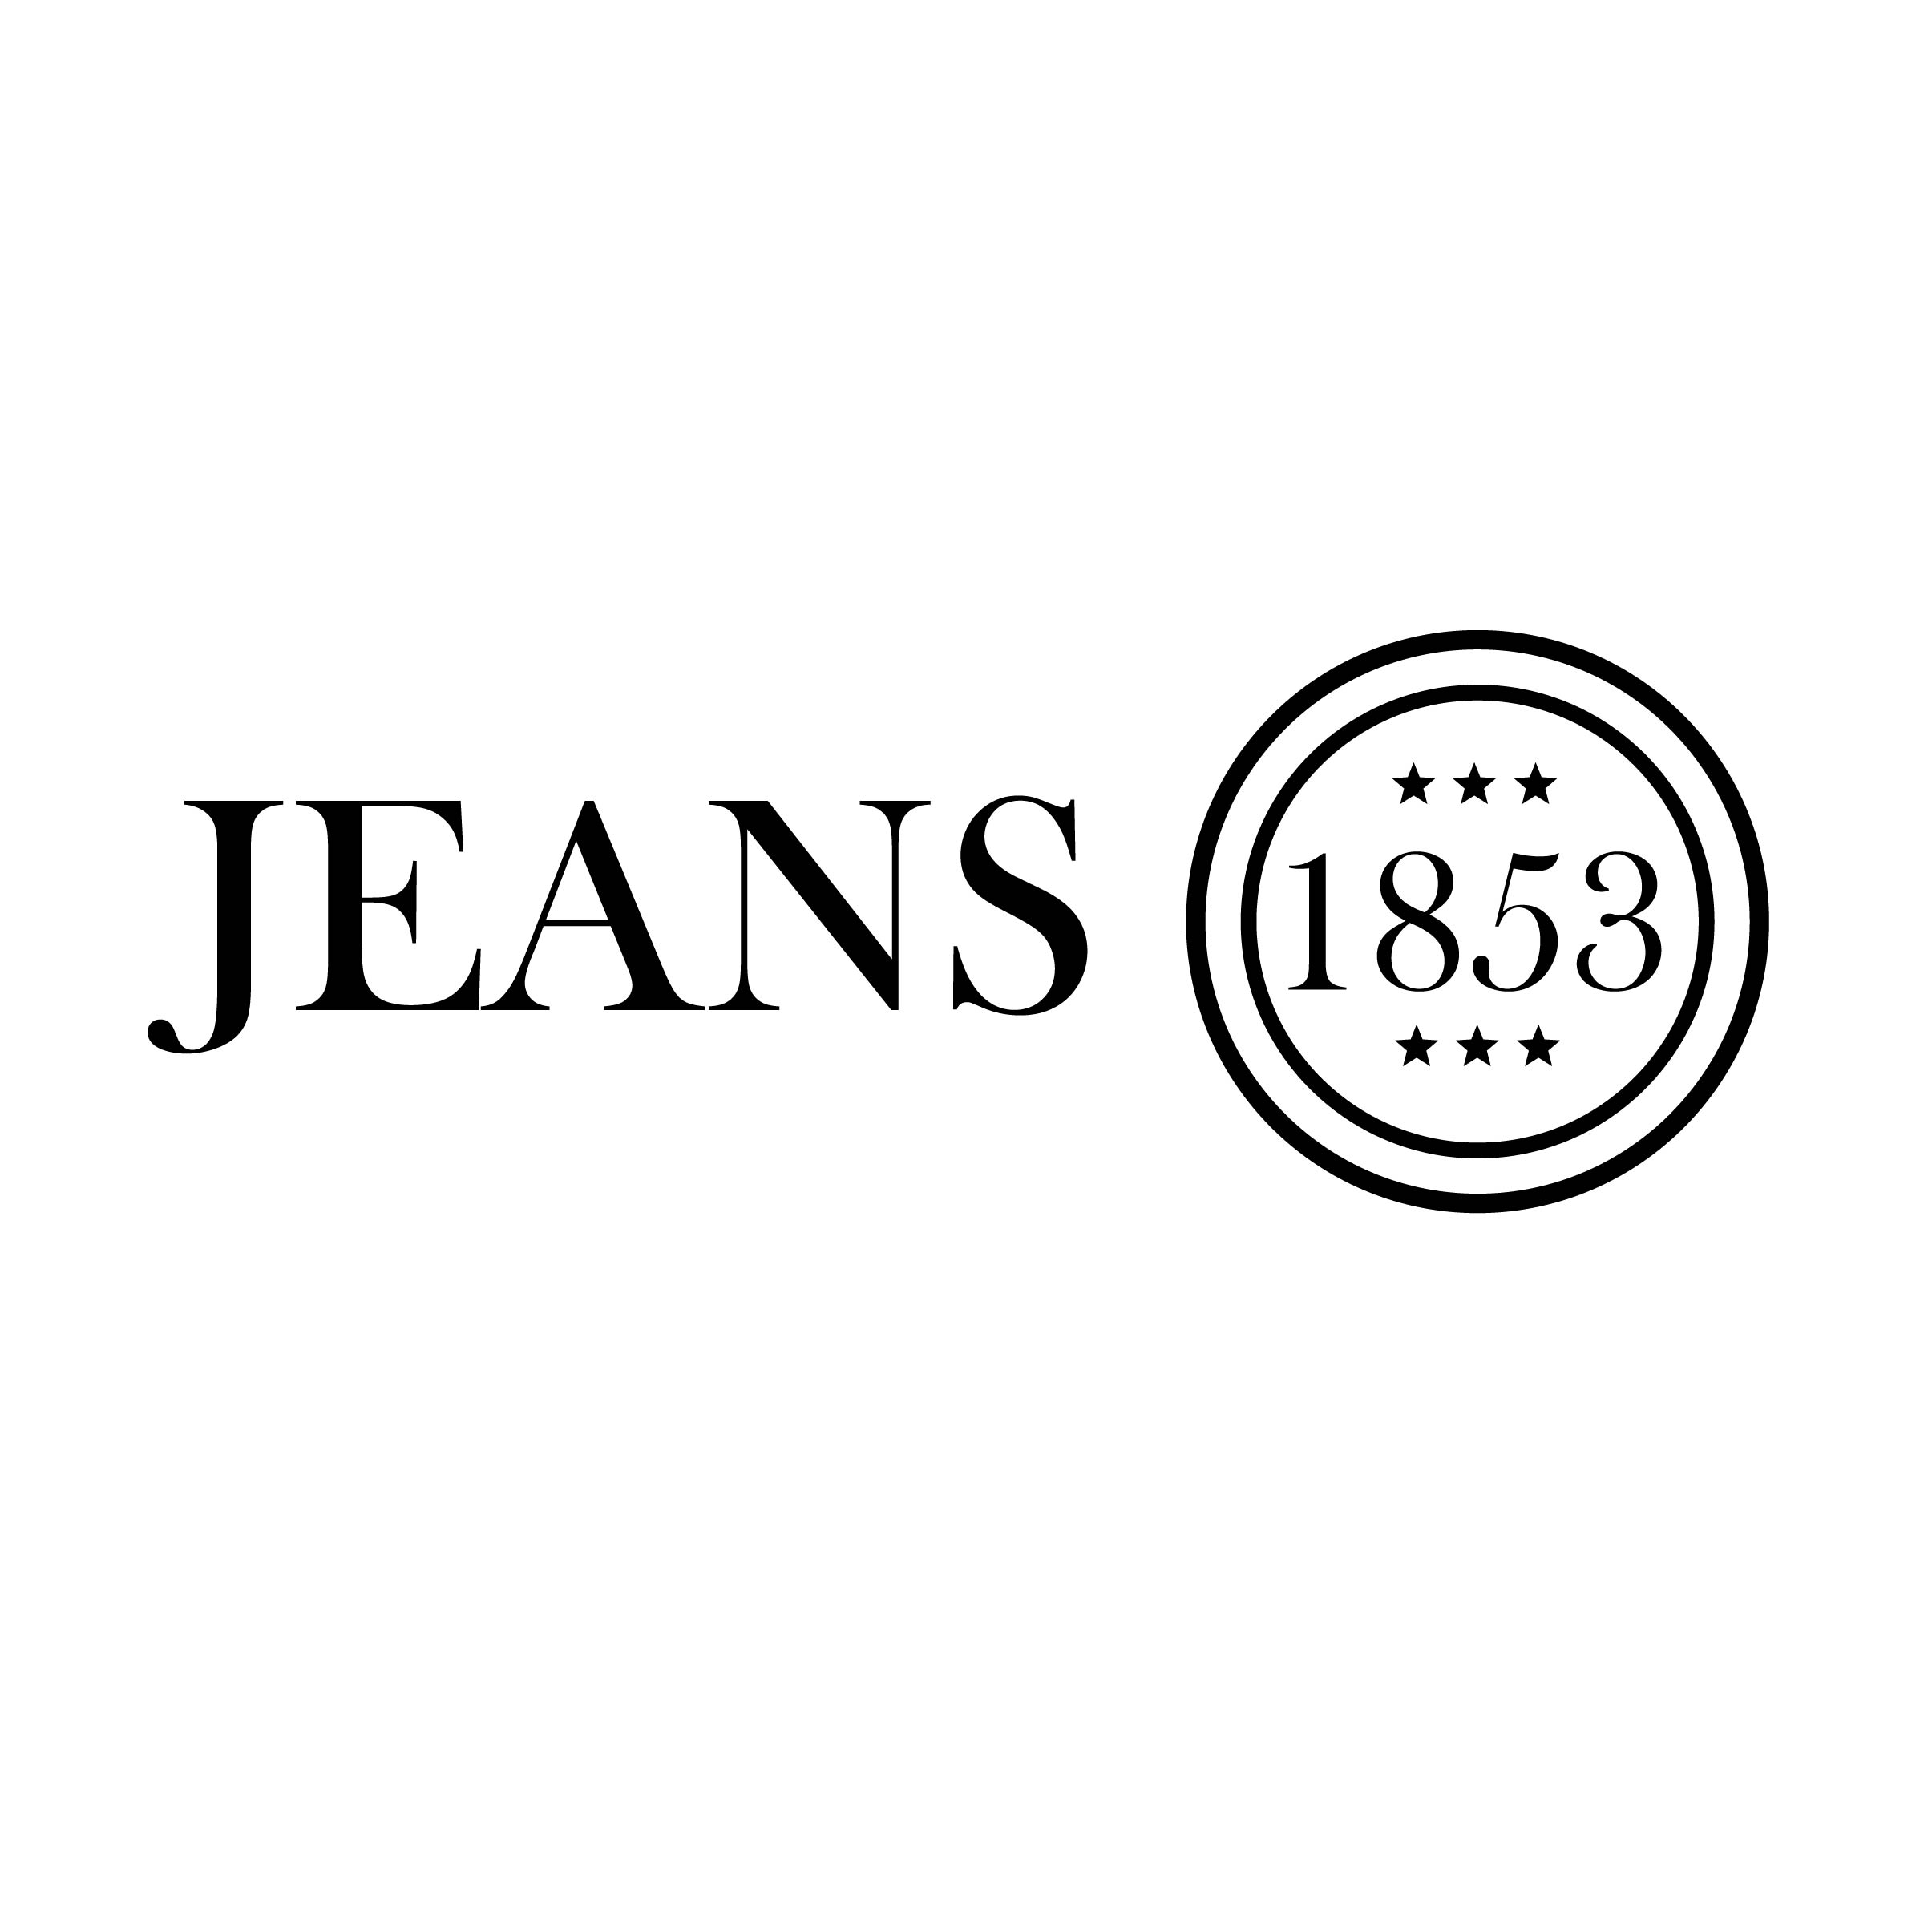  Jeans 1853